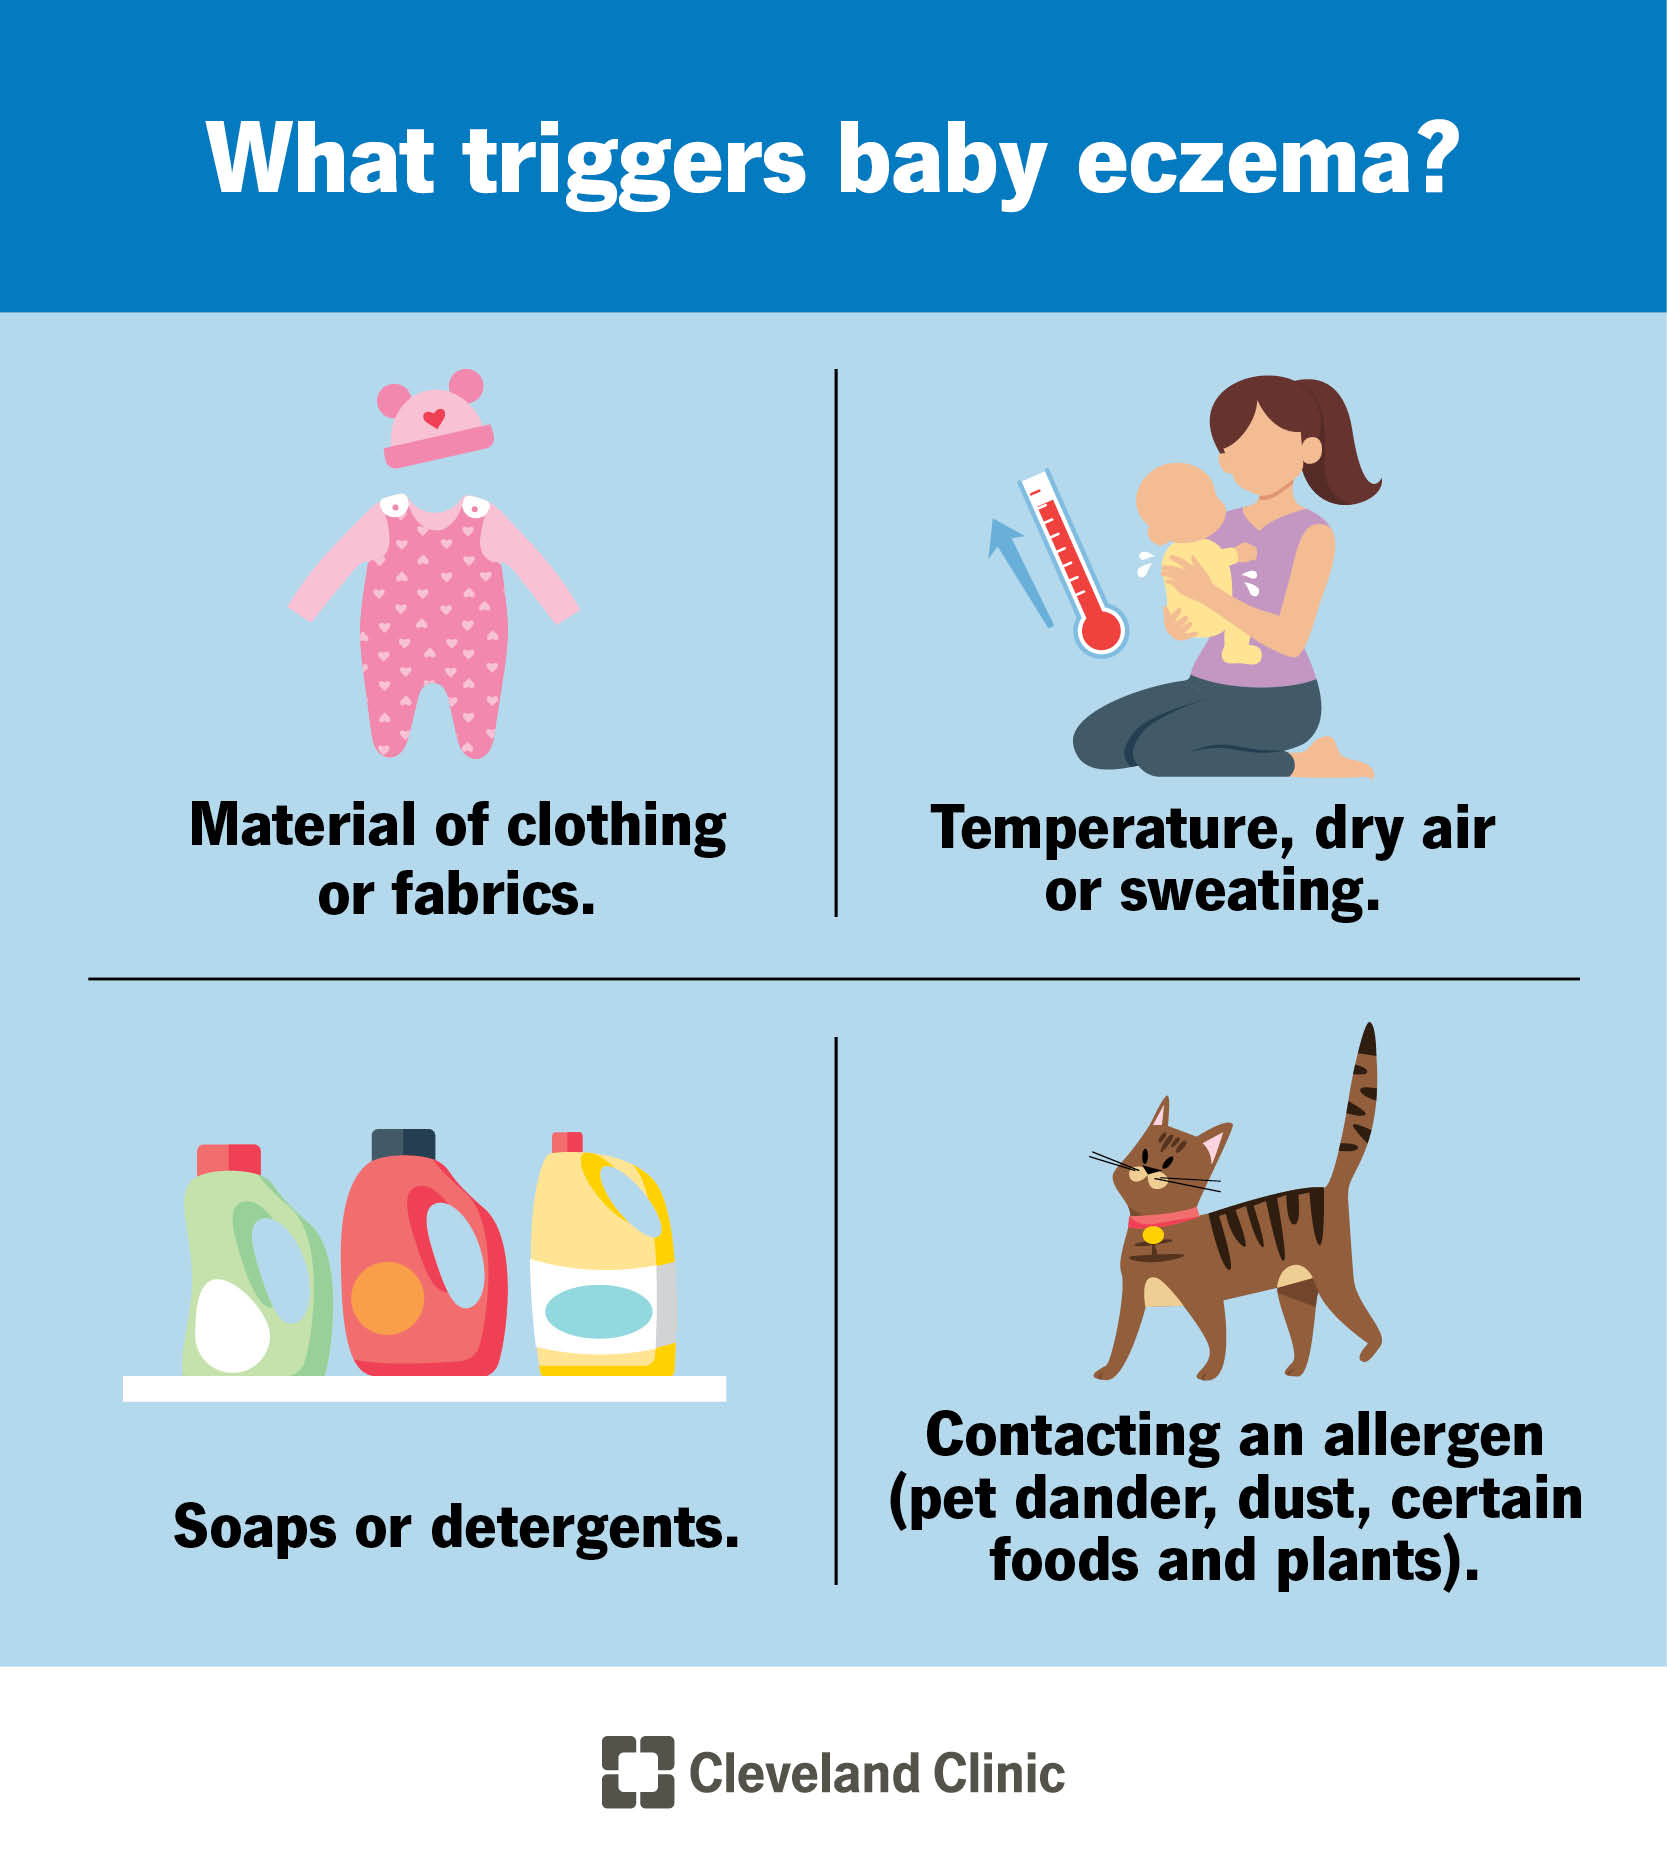 Baby eczema triggers make contact with an infant’s skin and cause symptoms.